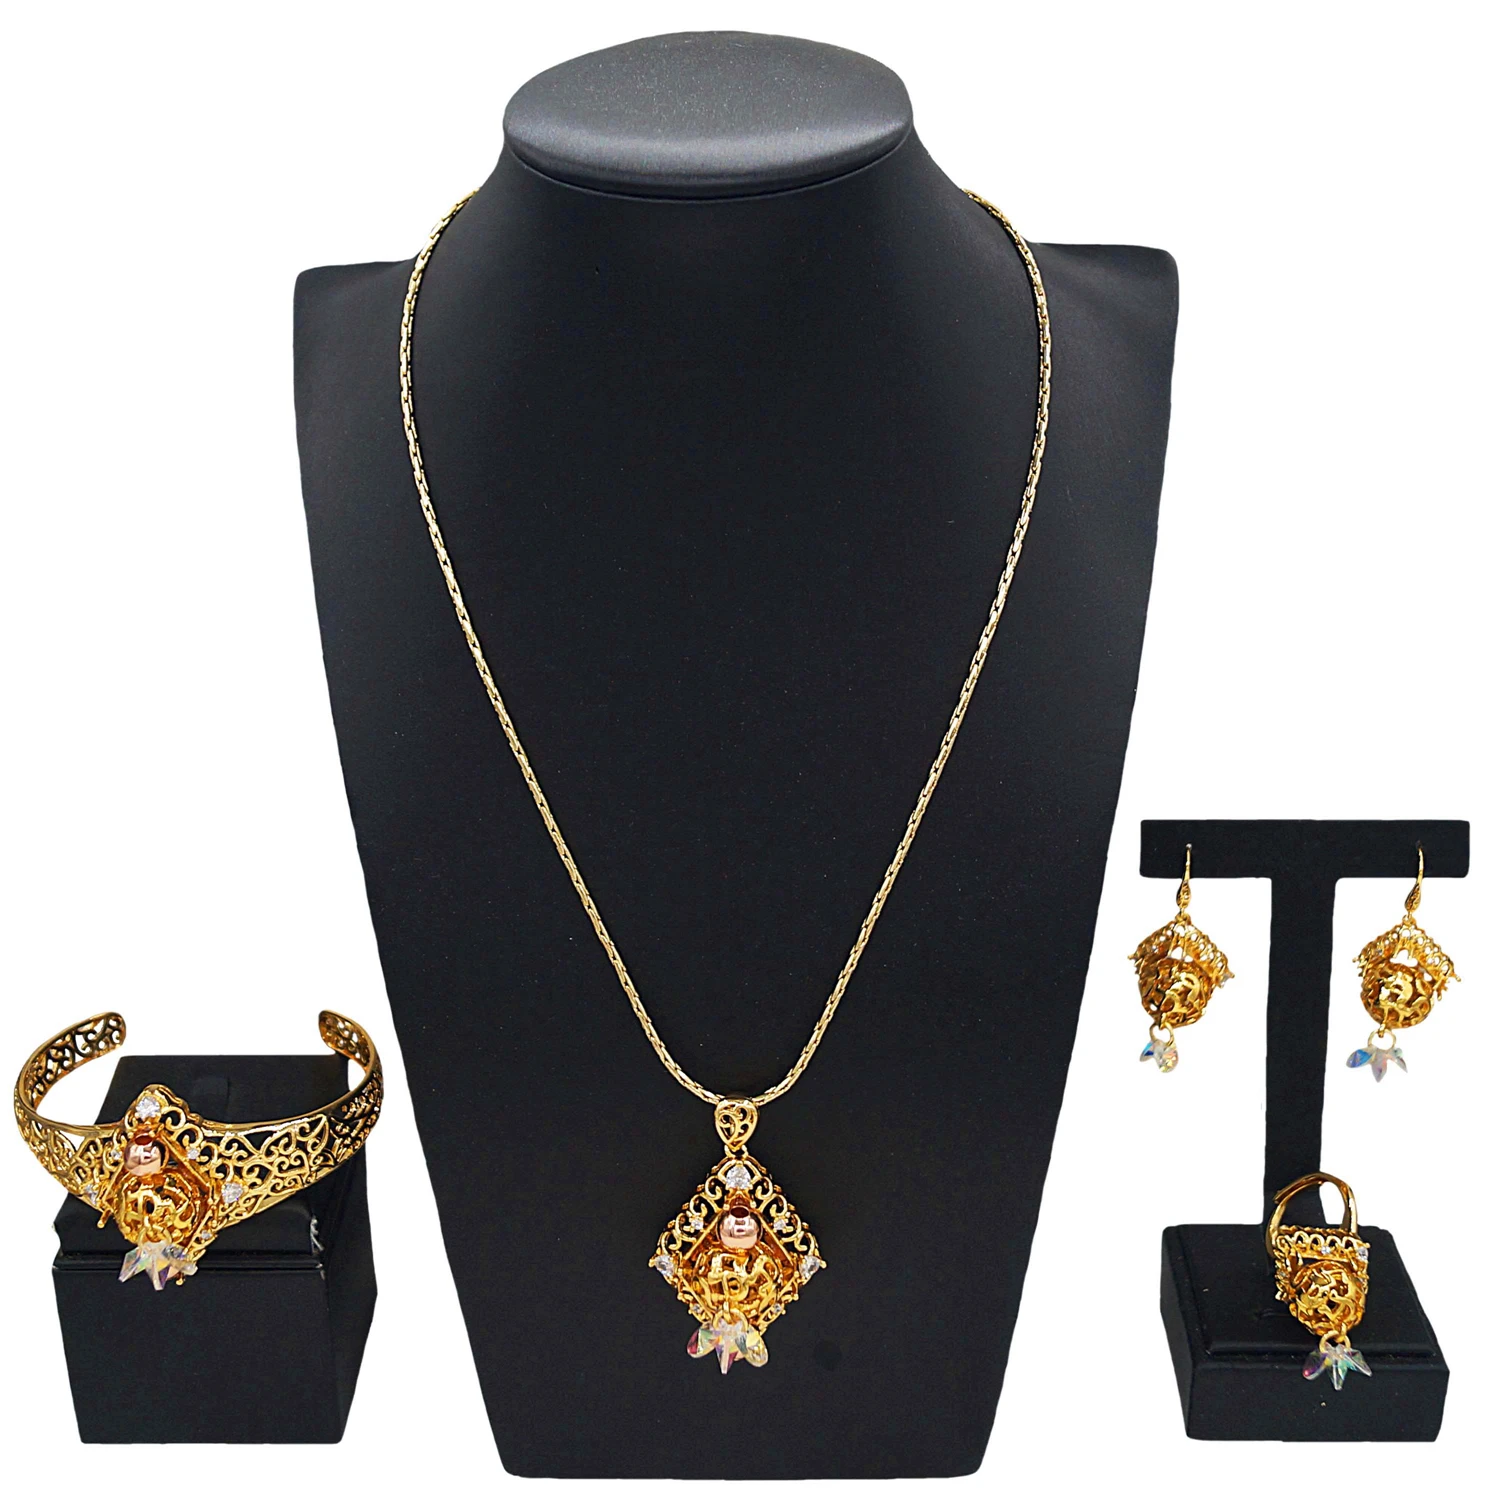 

Yuleili new 24k gold-plated jewelry four sets of Nigerian bride jewelry boutique craft luxury rich elders mother party gifts